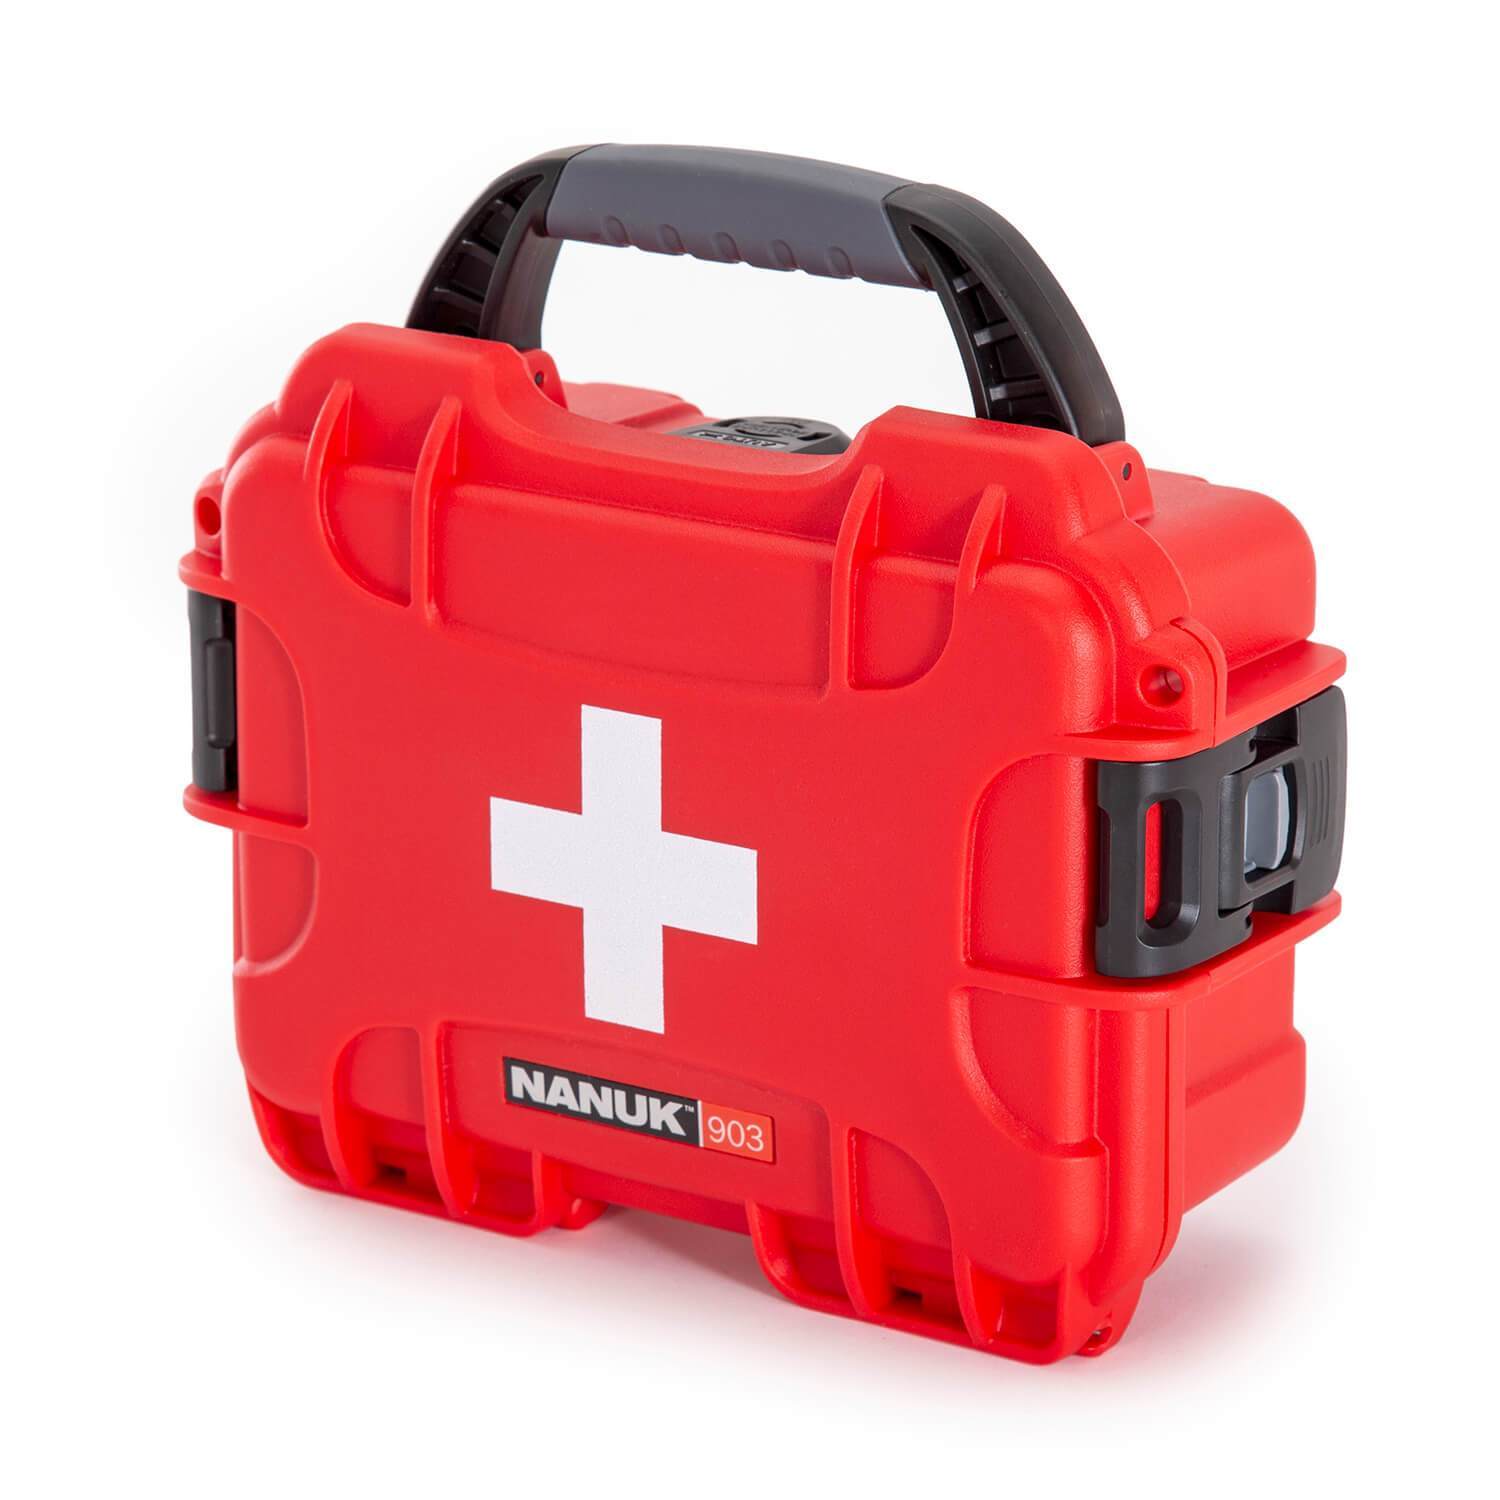 NANUK 903 First Aid case | Waterproof, Dustproof, Indestructible and Lifetime Guaranteed [collection_title]